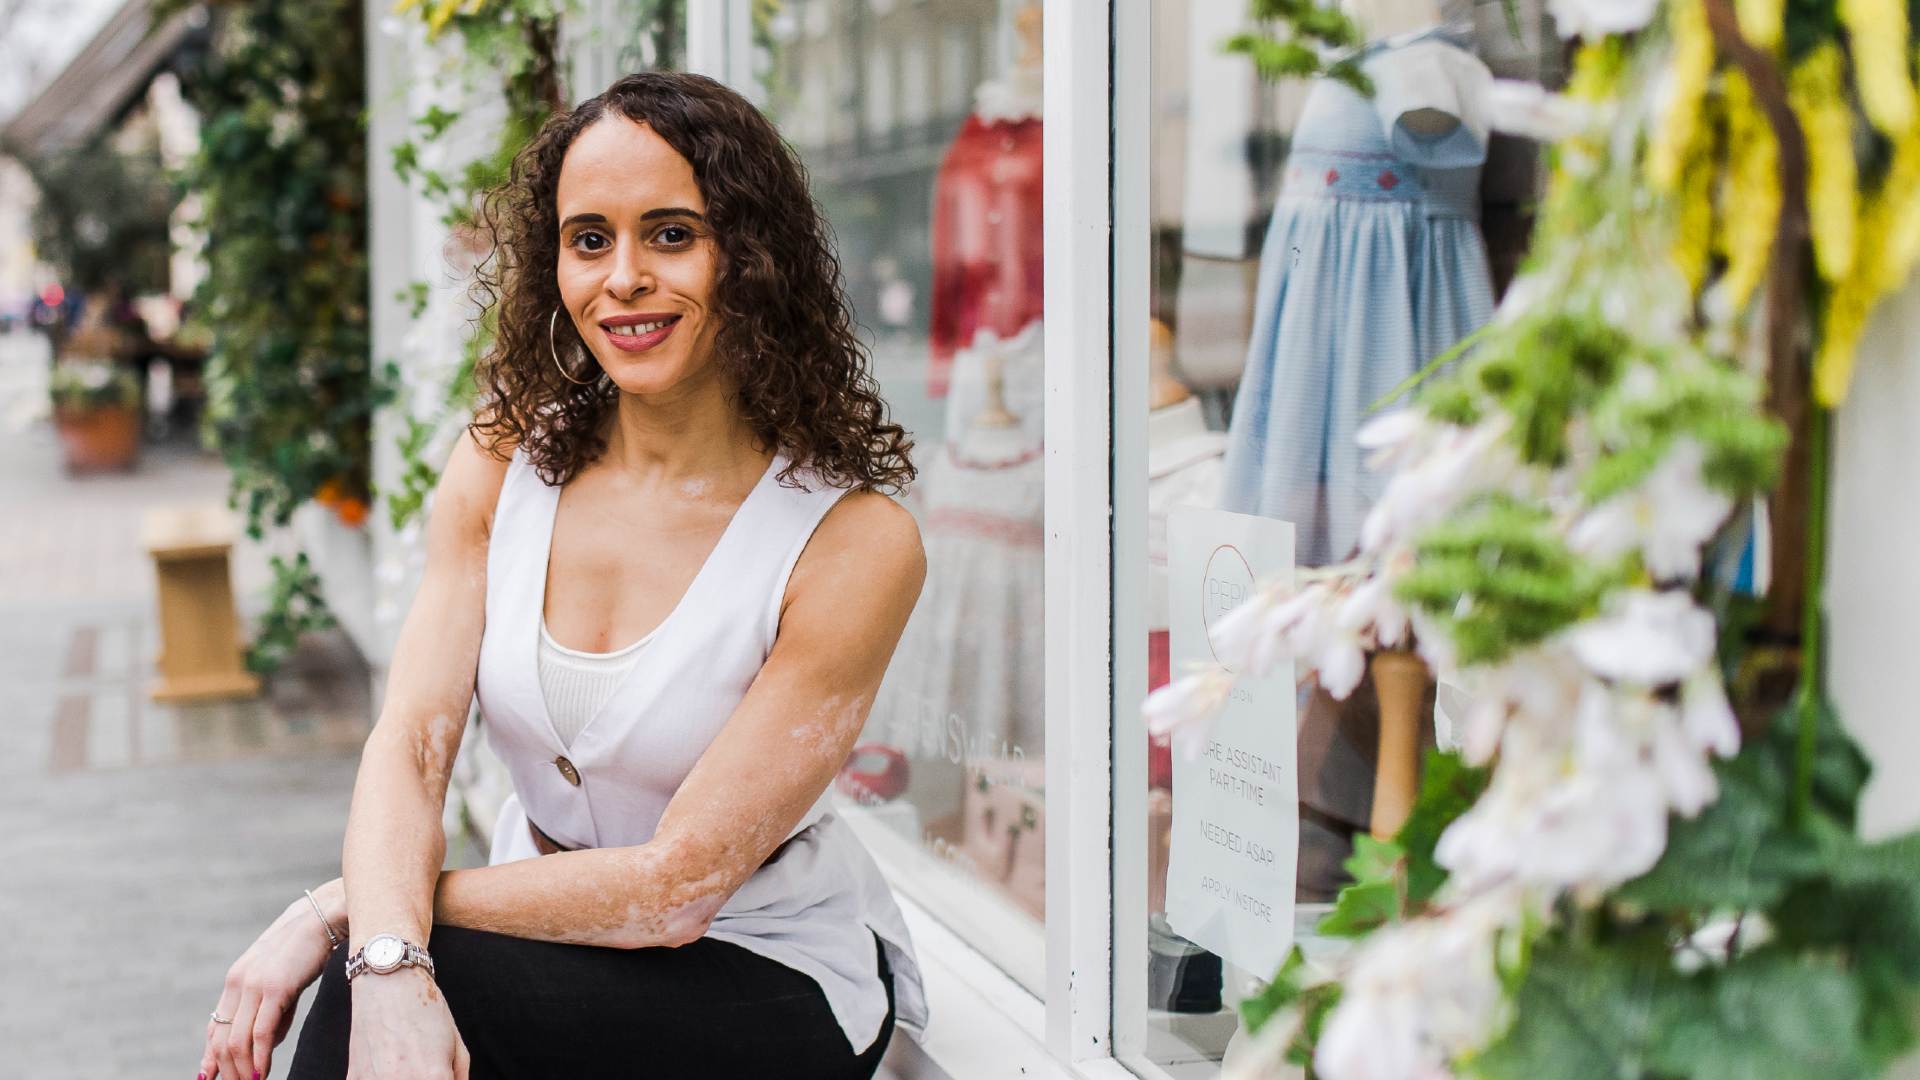 Natalie, who has vitiligo, is smiling towards the camera and wears a white vest-top and black trousers. She sits on a bench with shop windows in the background